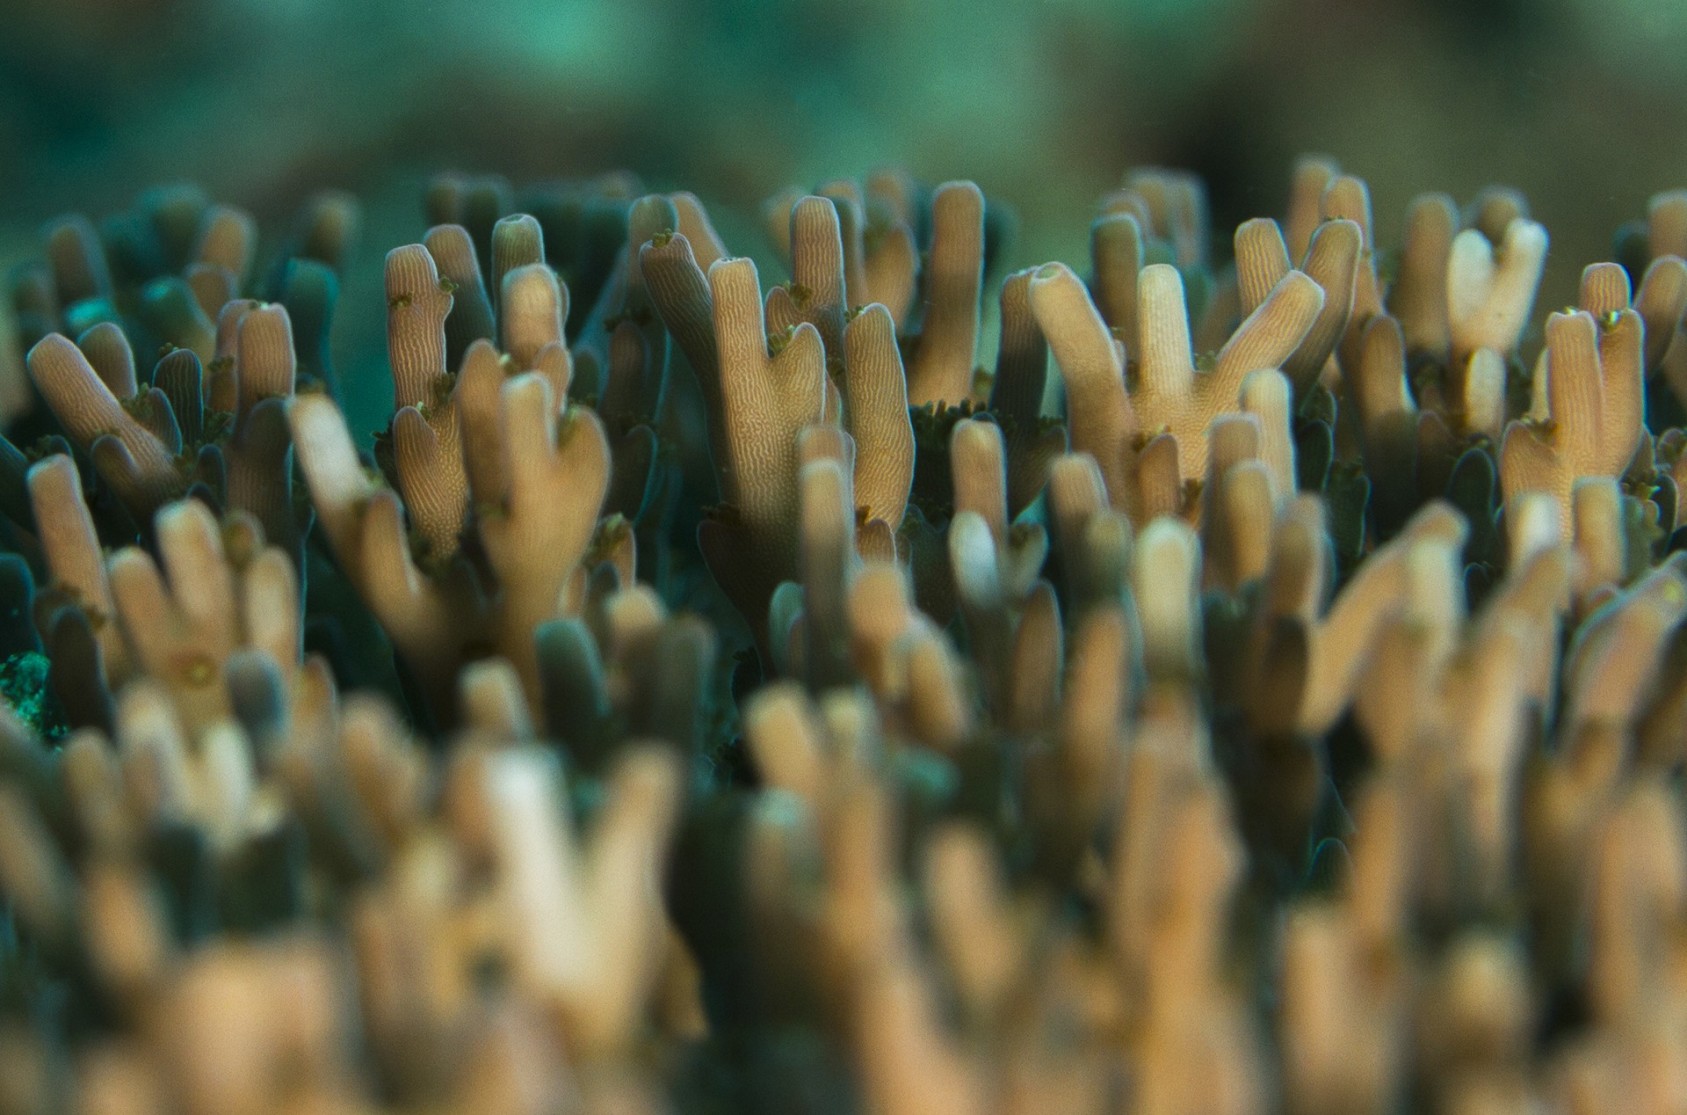 Hard Corals appear in a wide range of shapes and structures. The ones pictured here are small tube-like corals. They provide shelter and food to tiny fishes like damsels and many more.